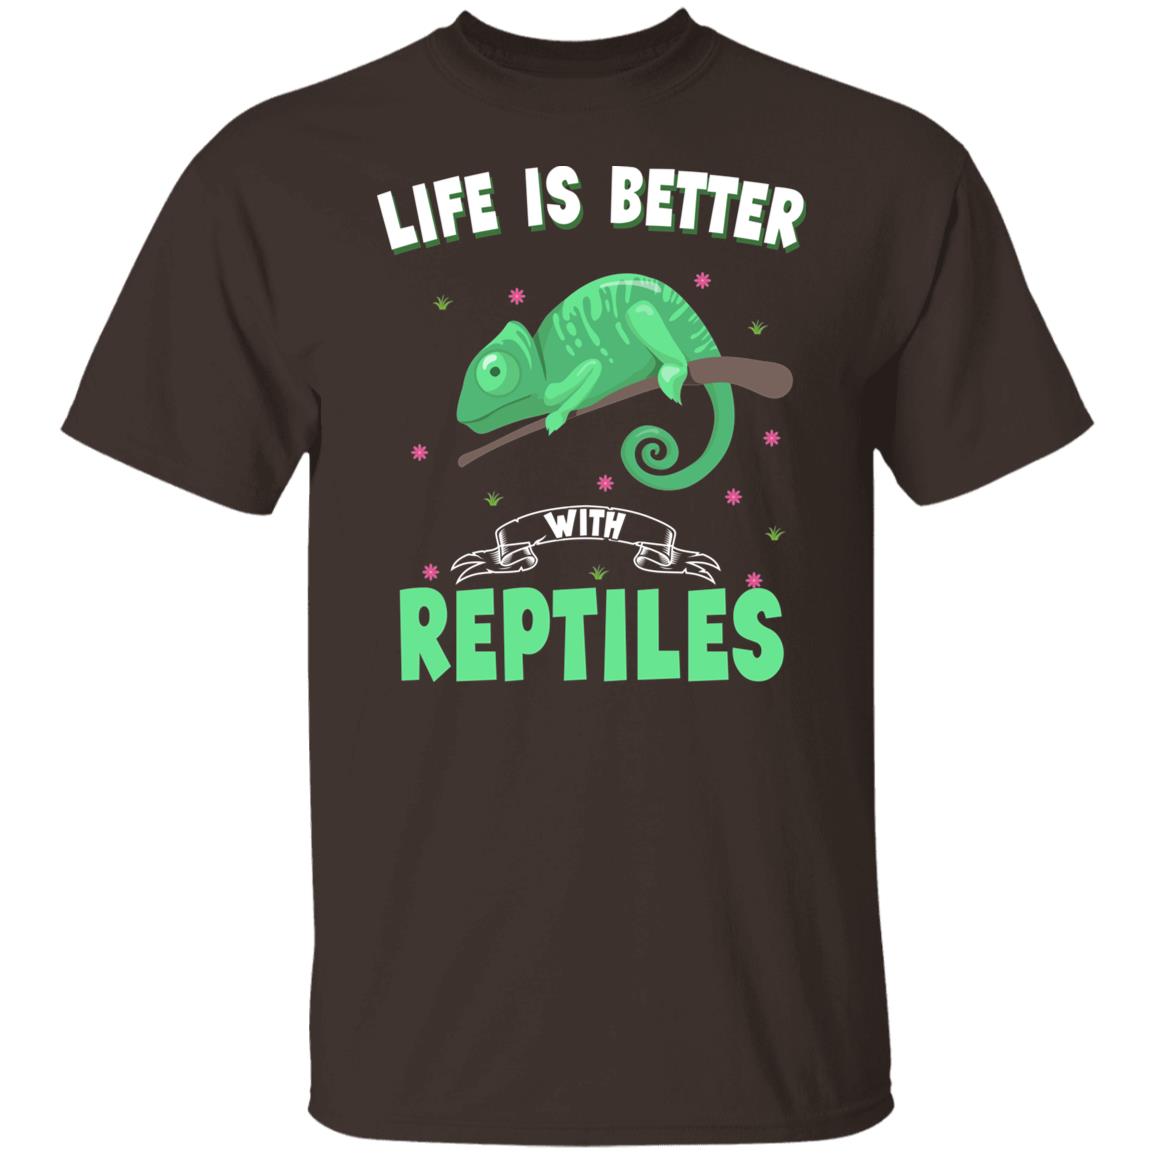 Life is Better With Reptiles - Men's T-Shirt